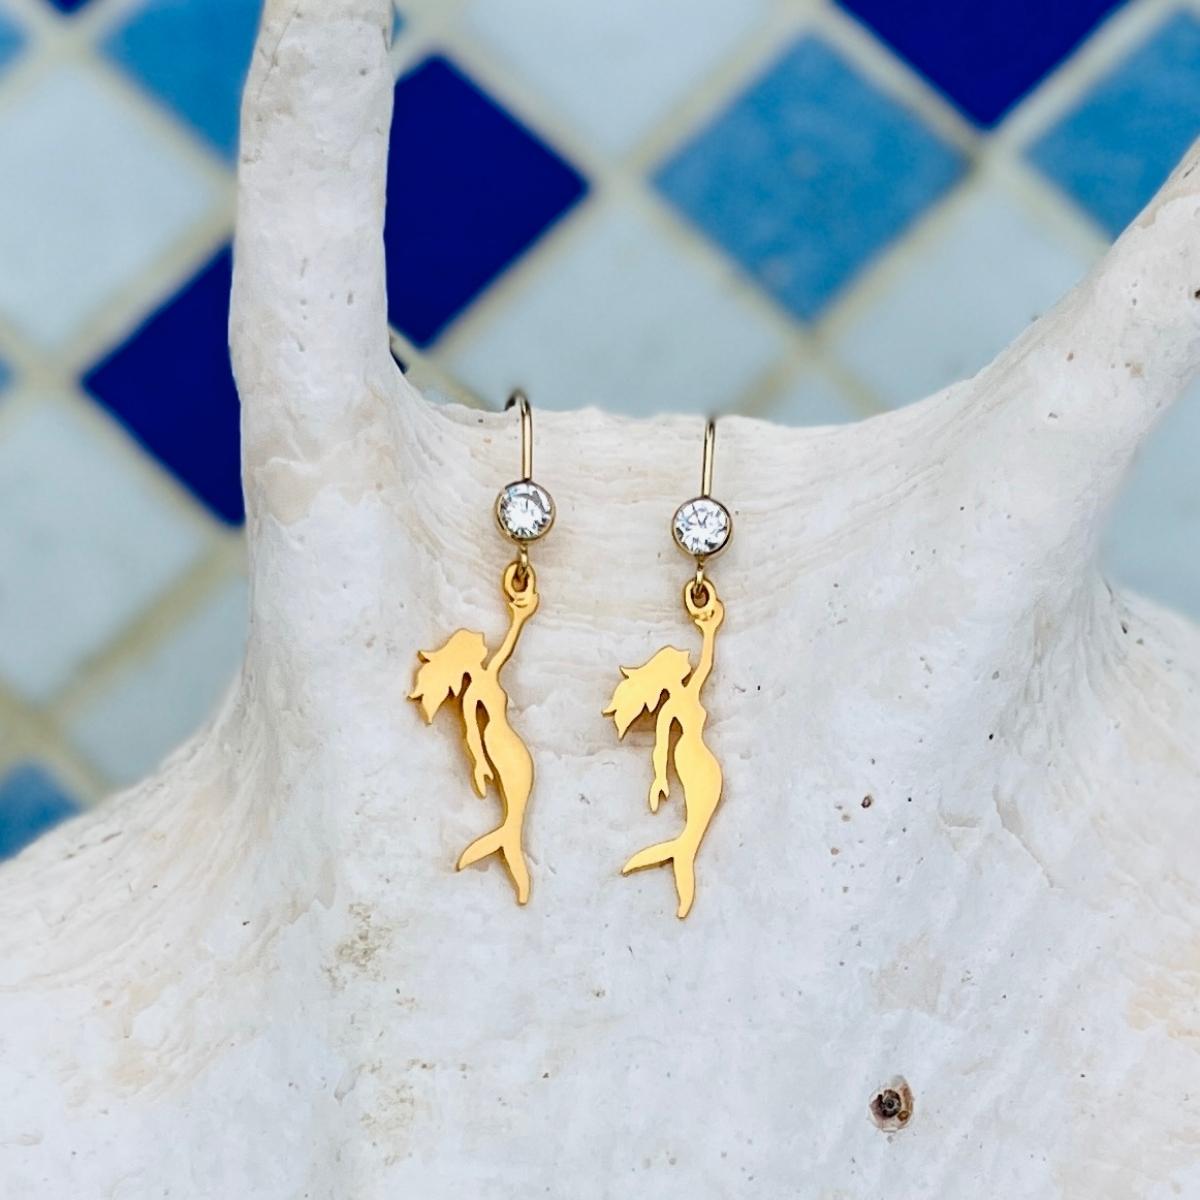 Gold Filled Miss Scuba Mermaid Earrings with Sparkly CZ Crystal This piece reflects Miss Scuba's sense of mystery and individuality, and beckons the free spirit in every self-made women.  Mermaids symbolize Love, Beauty, Mystery, Untamed Spirit and Femininity.